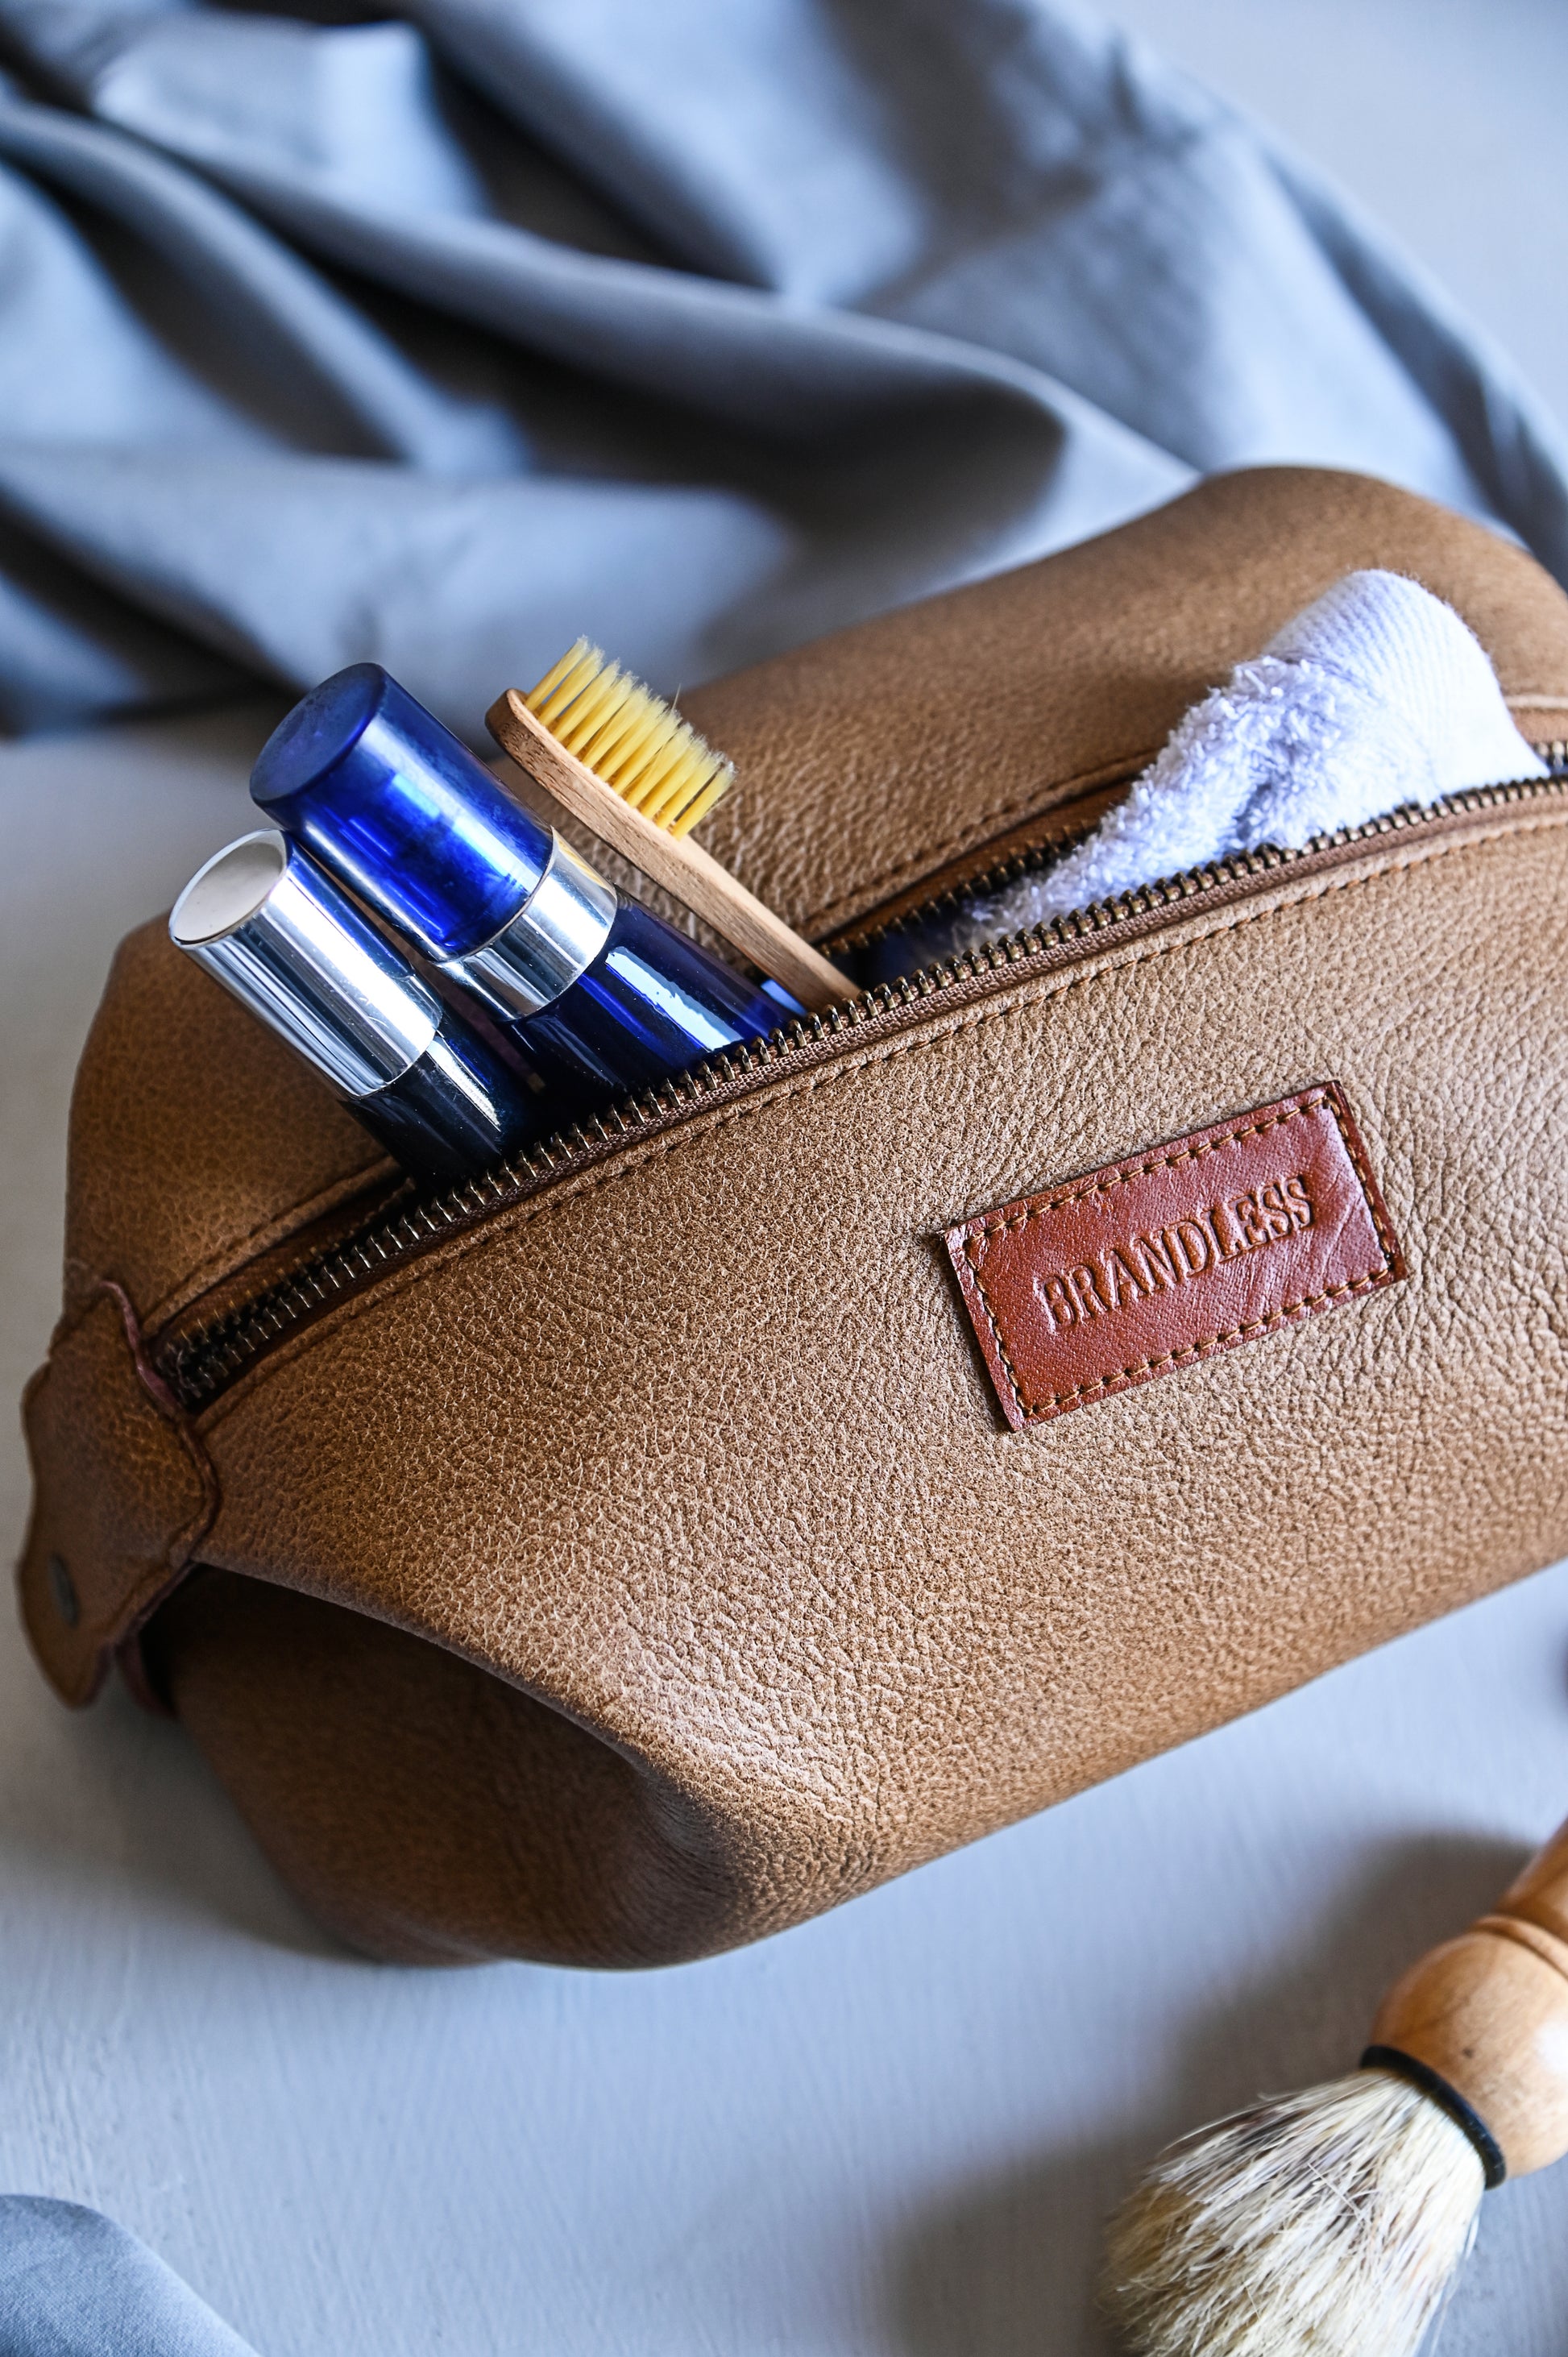 Travel Dopp Kit handcrafted in genuine leather. Mens grooming essential. Luxury Corporate Gifting. Leather Shaving Kit by Brandless